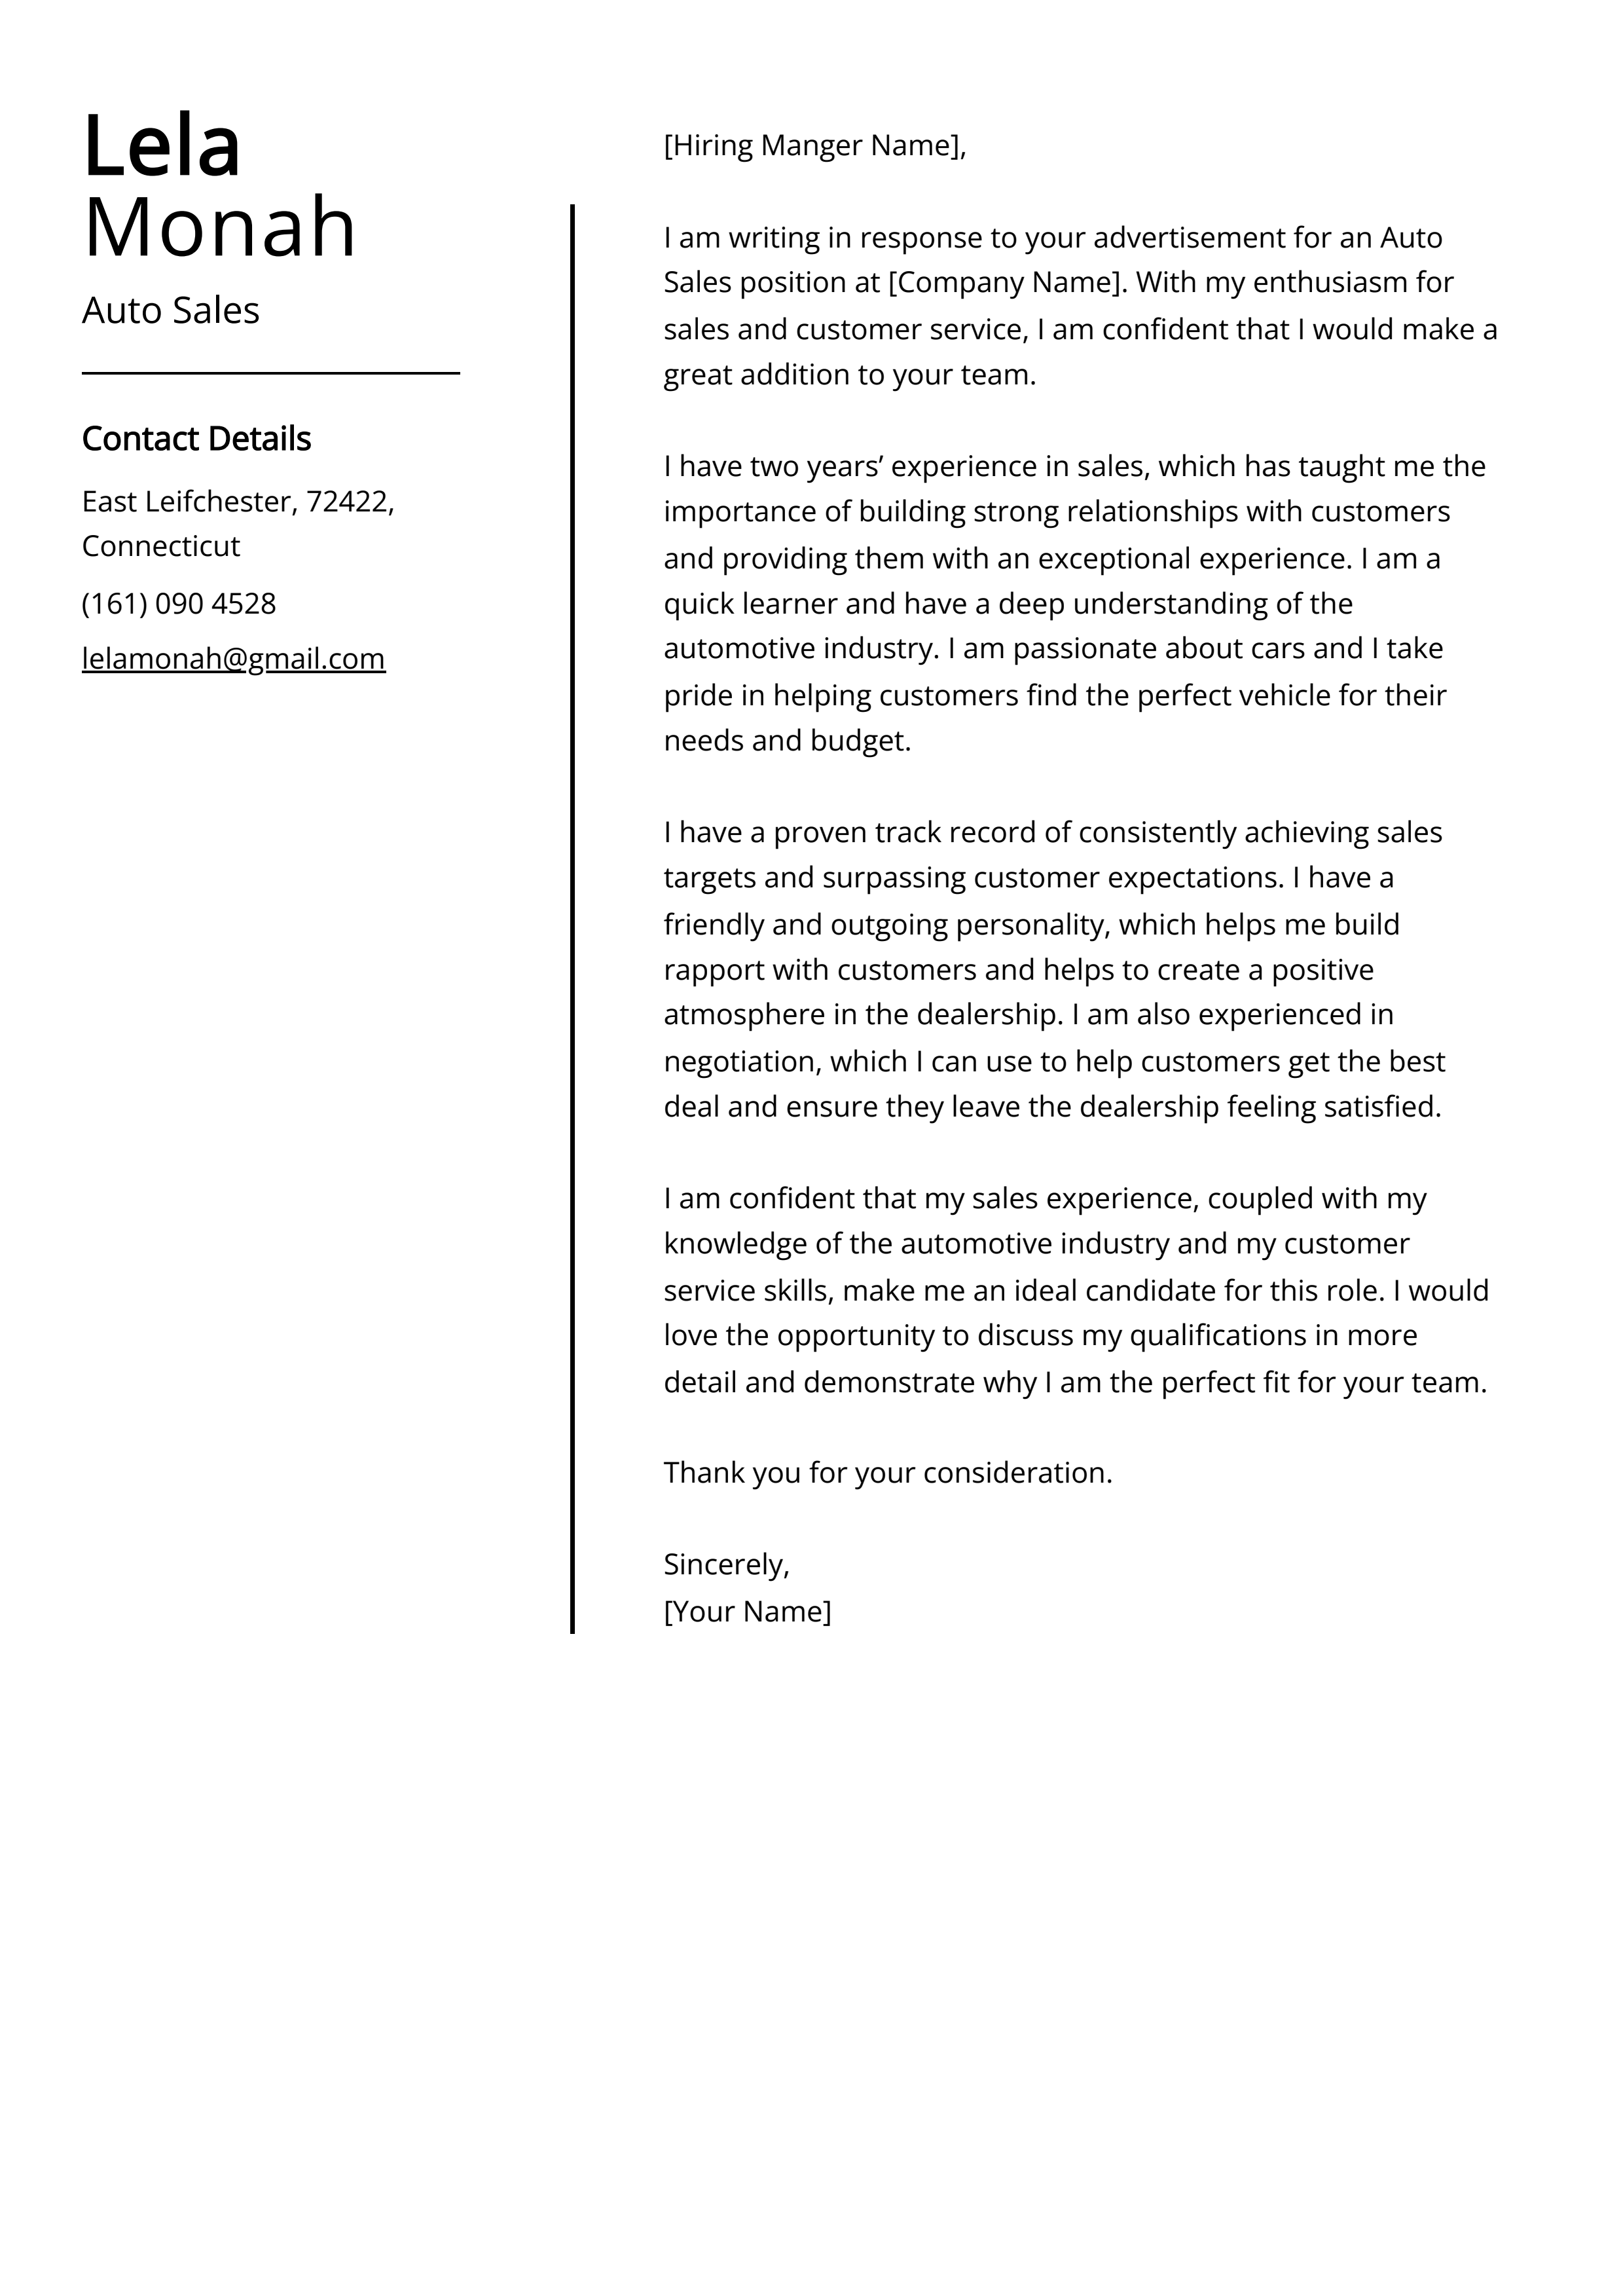 Auto Sales Cover Letter Example